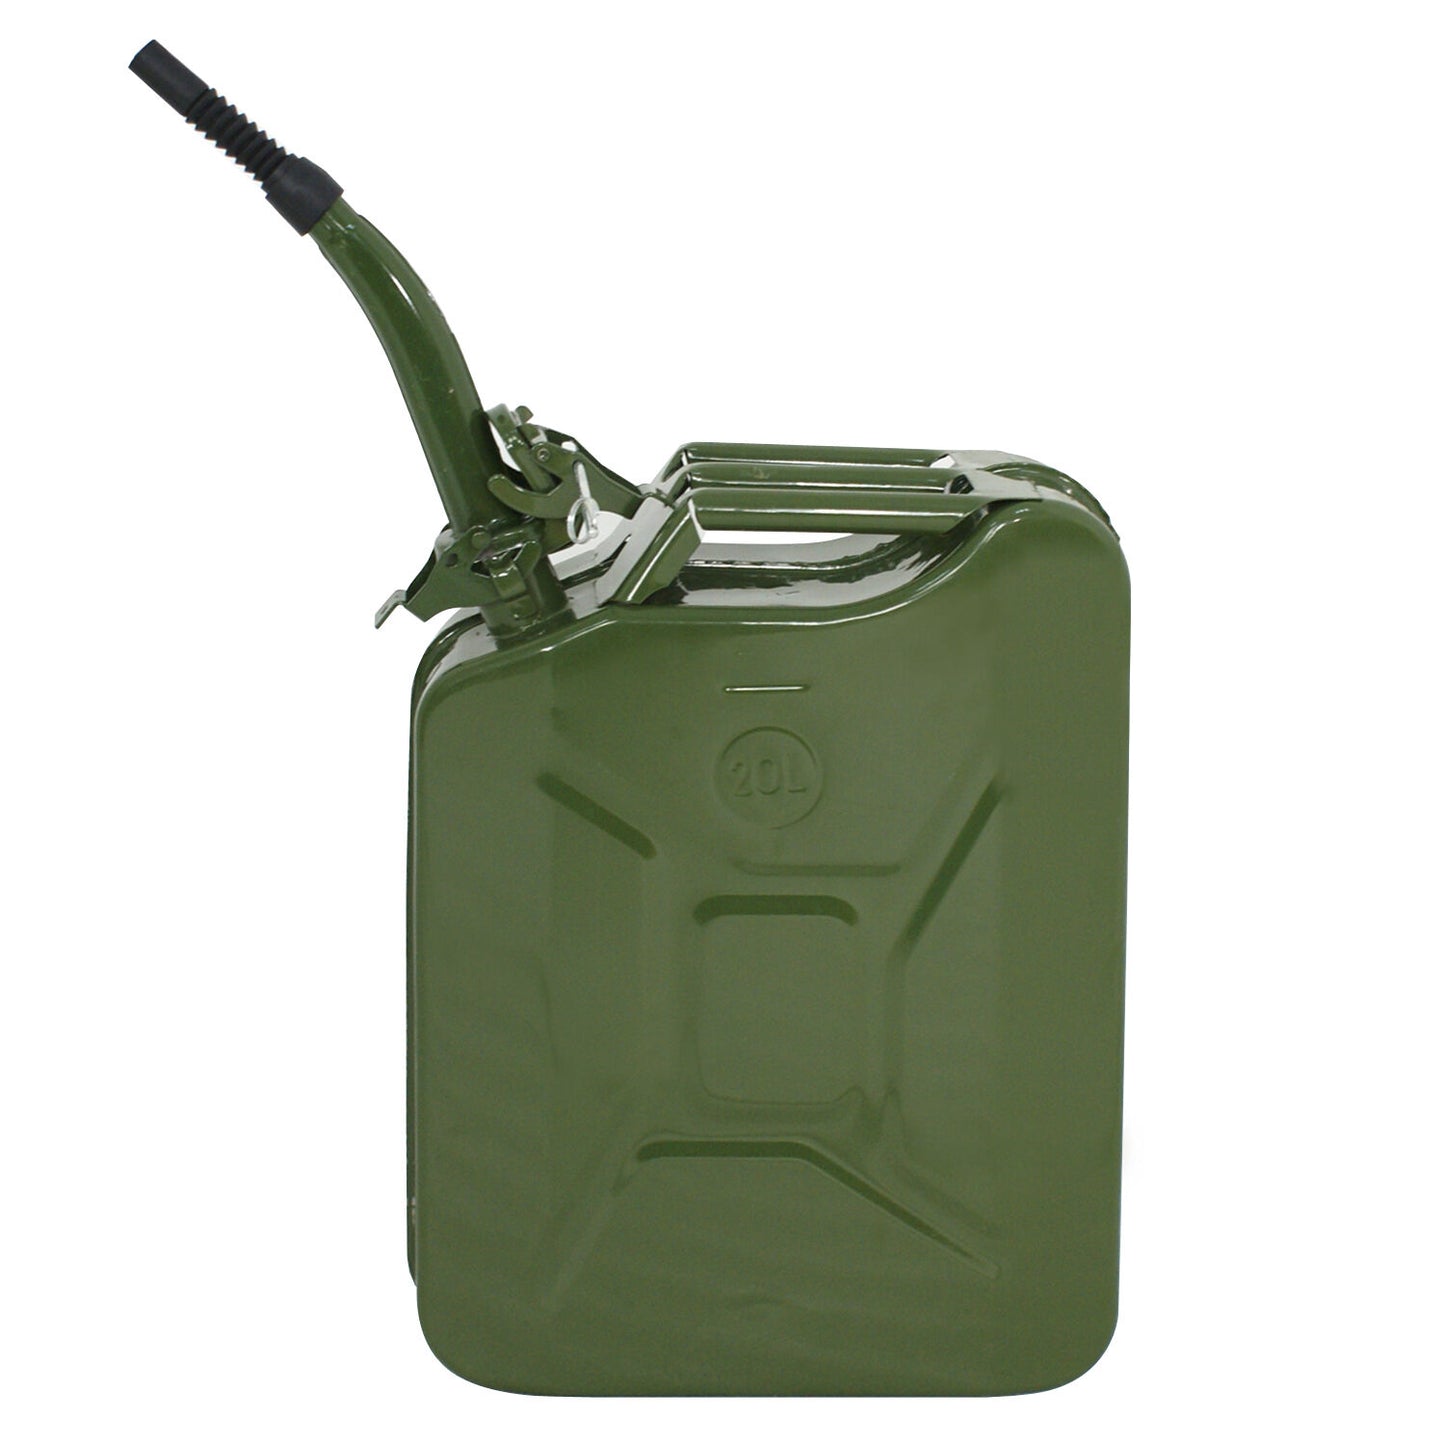 5X 5Gal 20L Army Backup Jerry Can Gasoline Can Metal Tank Emergency Backup Green